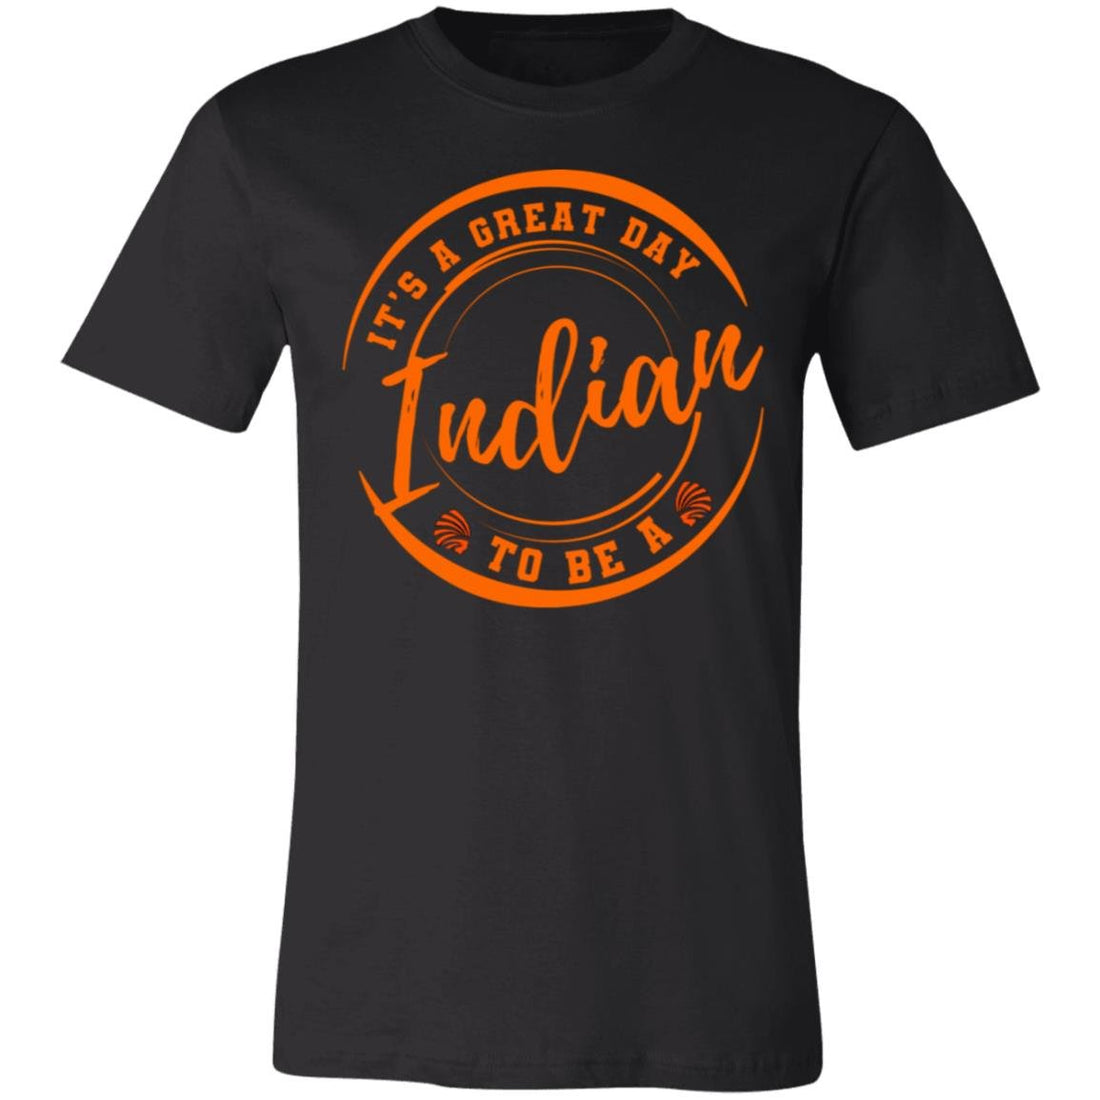 Great Day to be a Indian T-Shirt - T-Shirts - Positively Sassy - Great Day to be a Indian T-Shirt